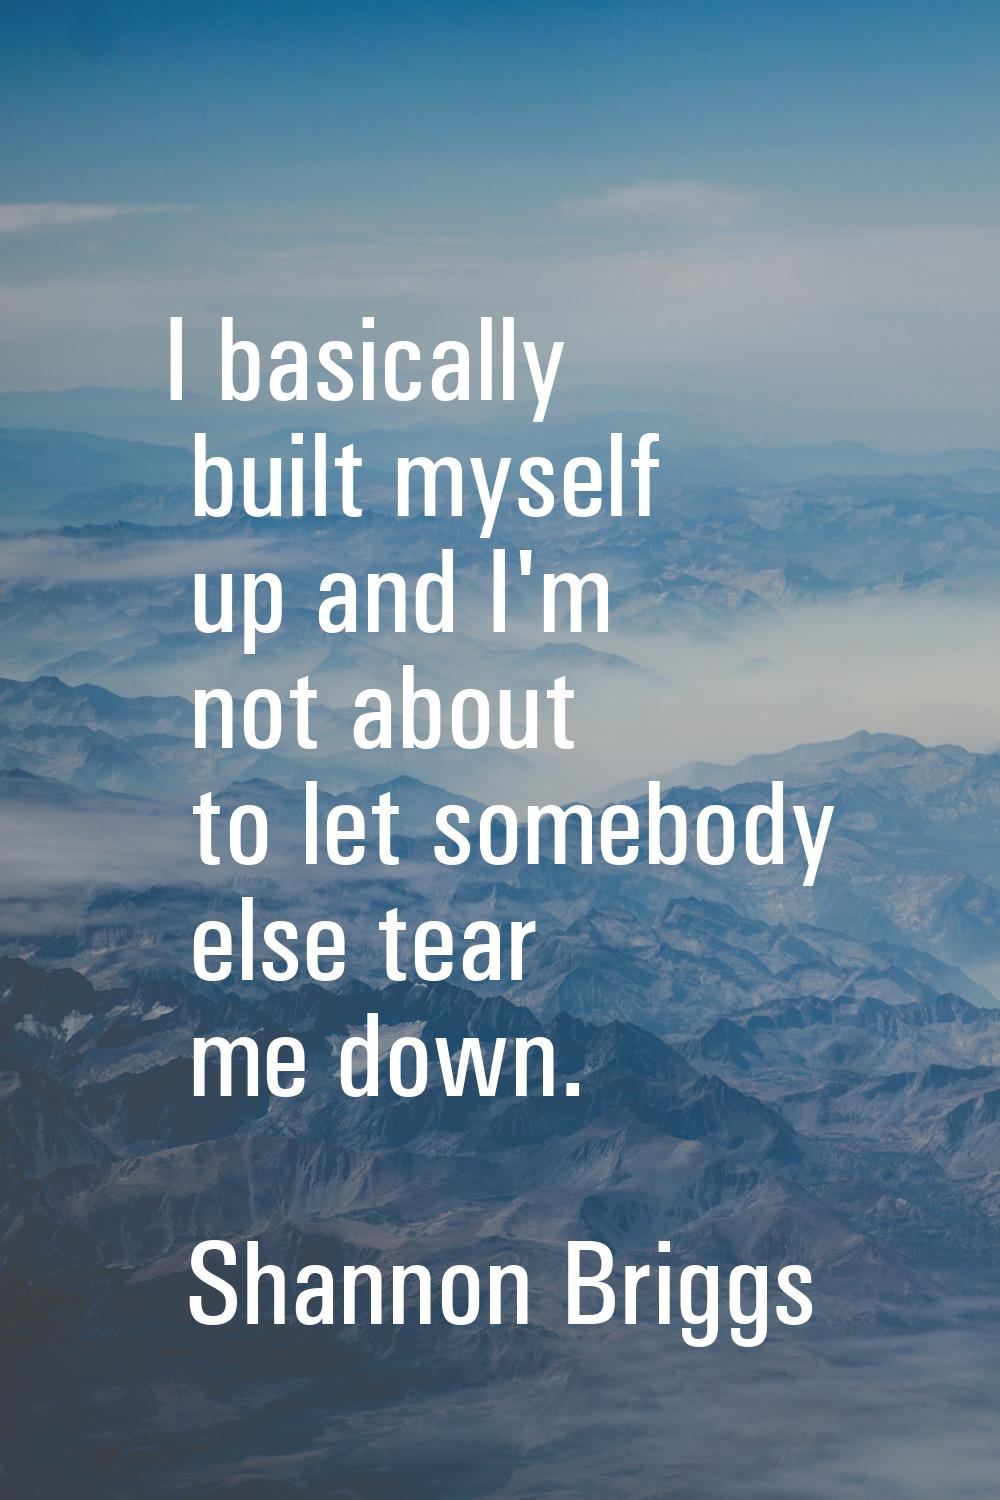 I basically built myself up and I'm not about to let somebody else tear me down.